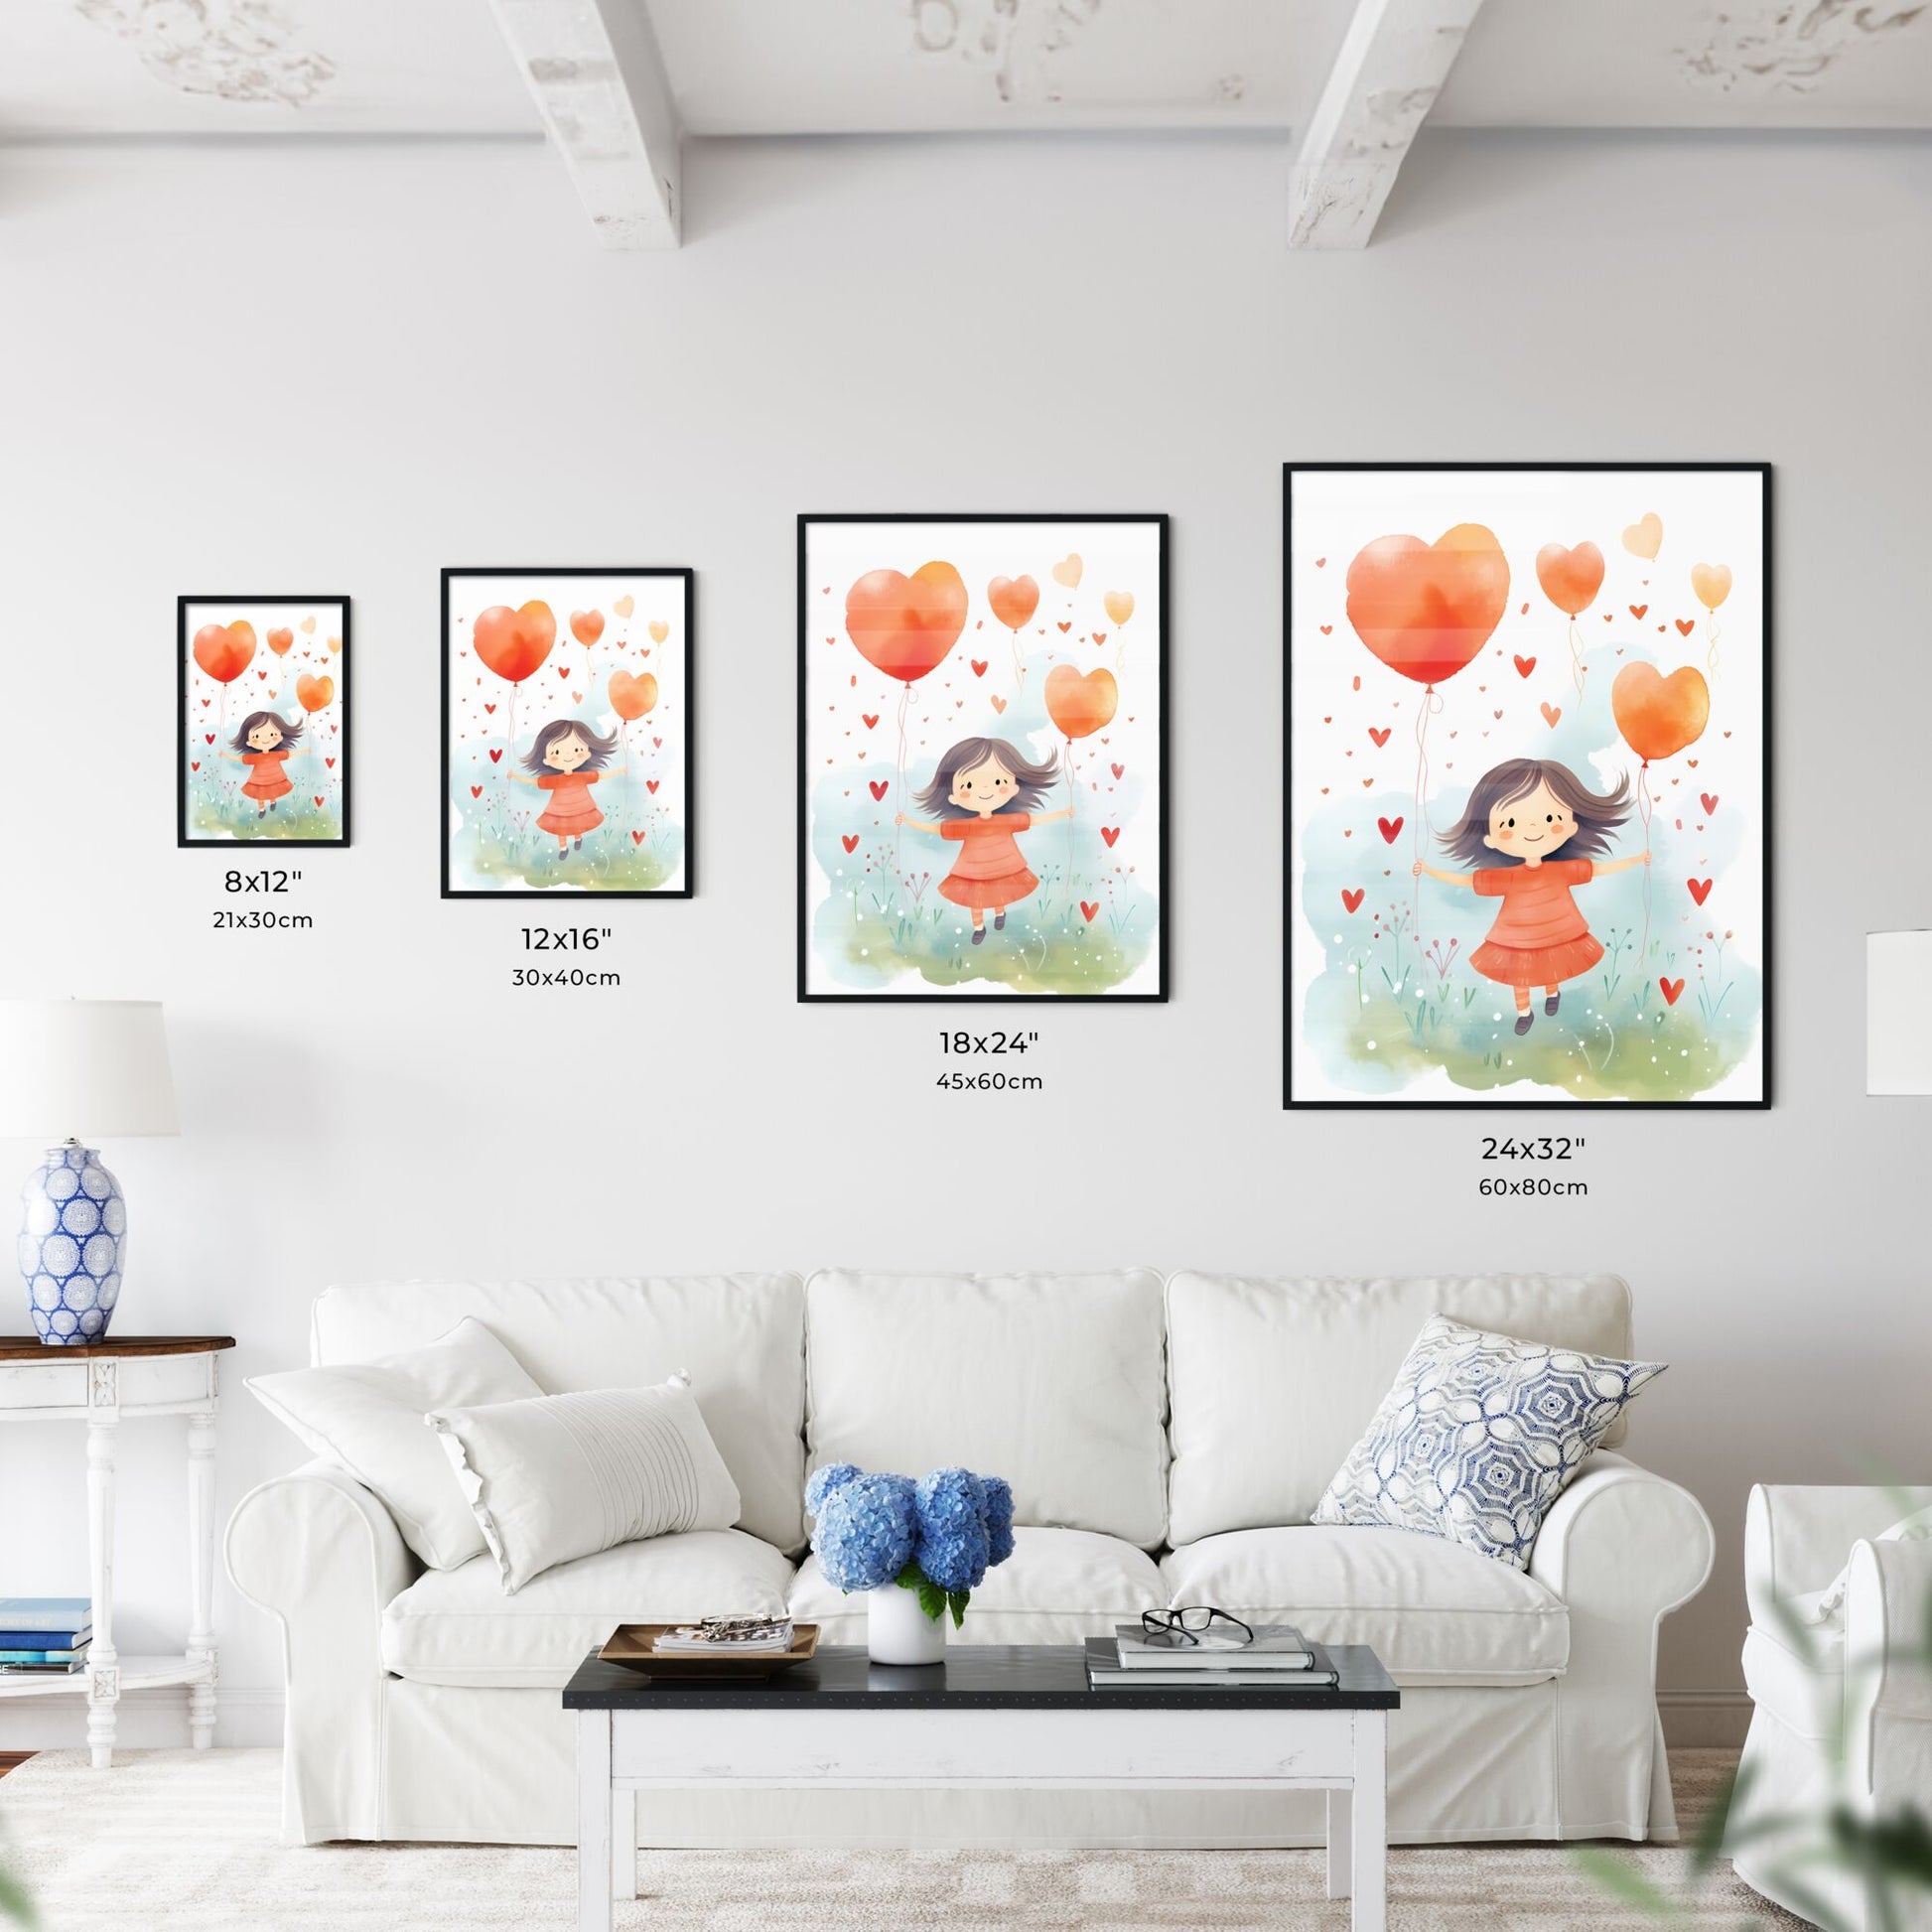 A Girl Holding Balloons In The Air Art Print Default Title